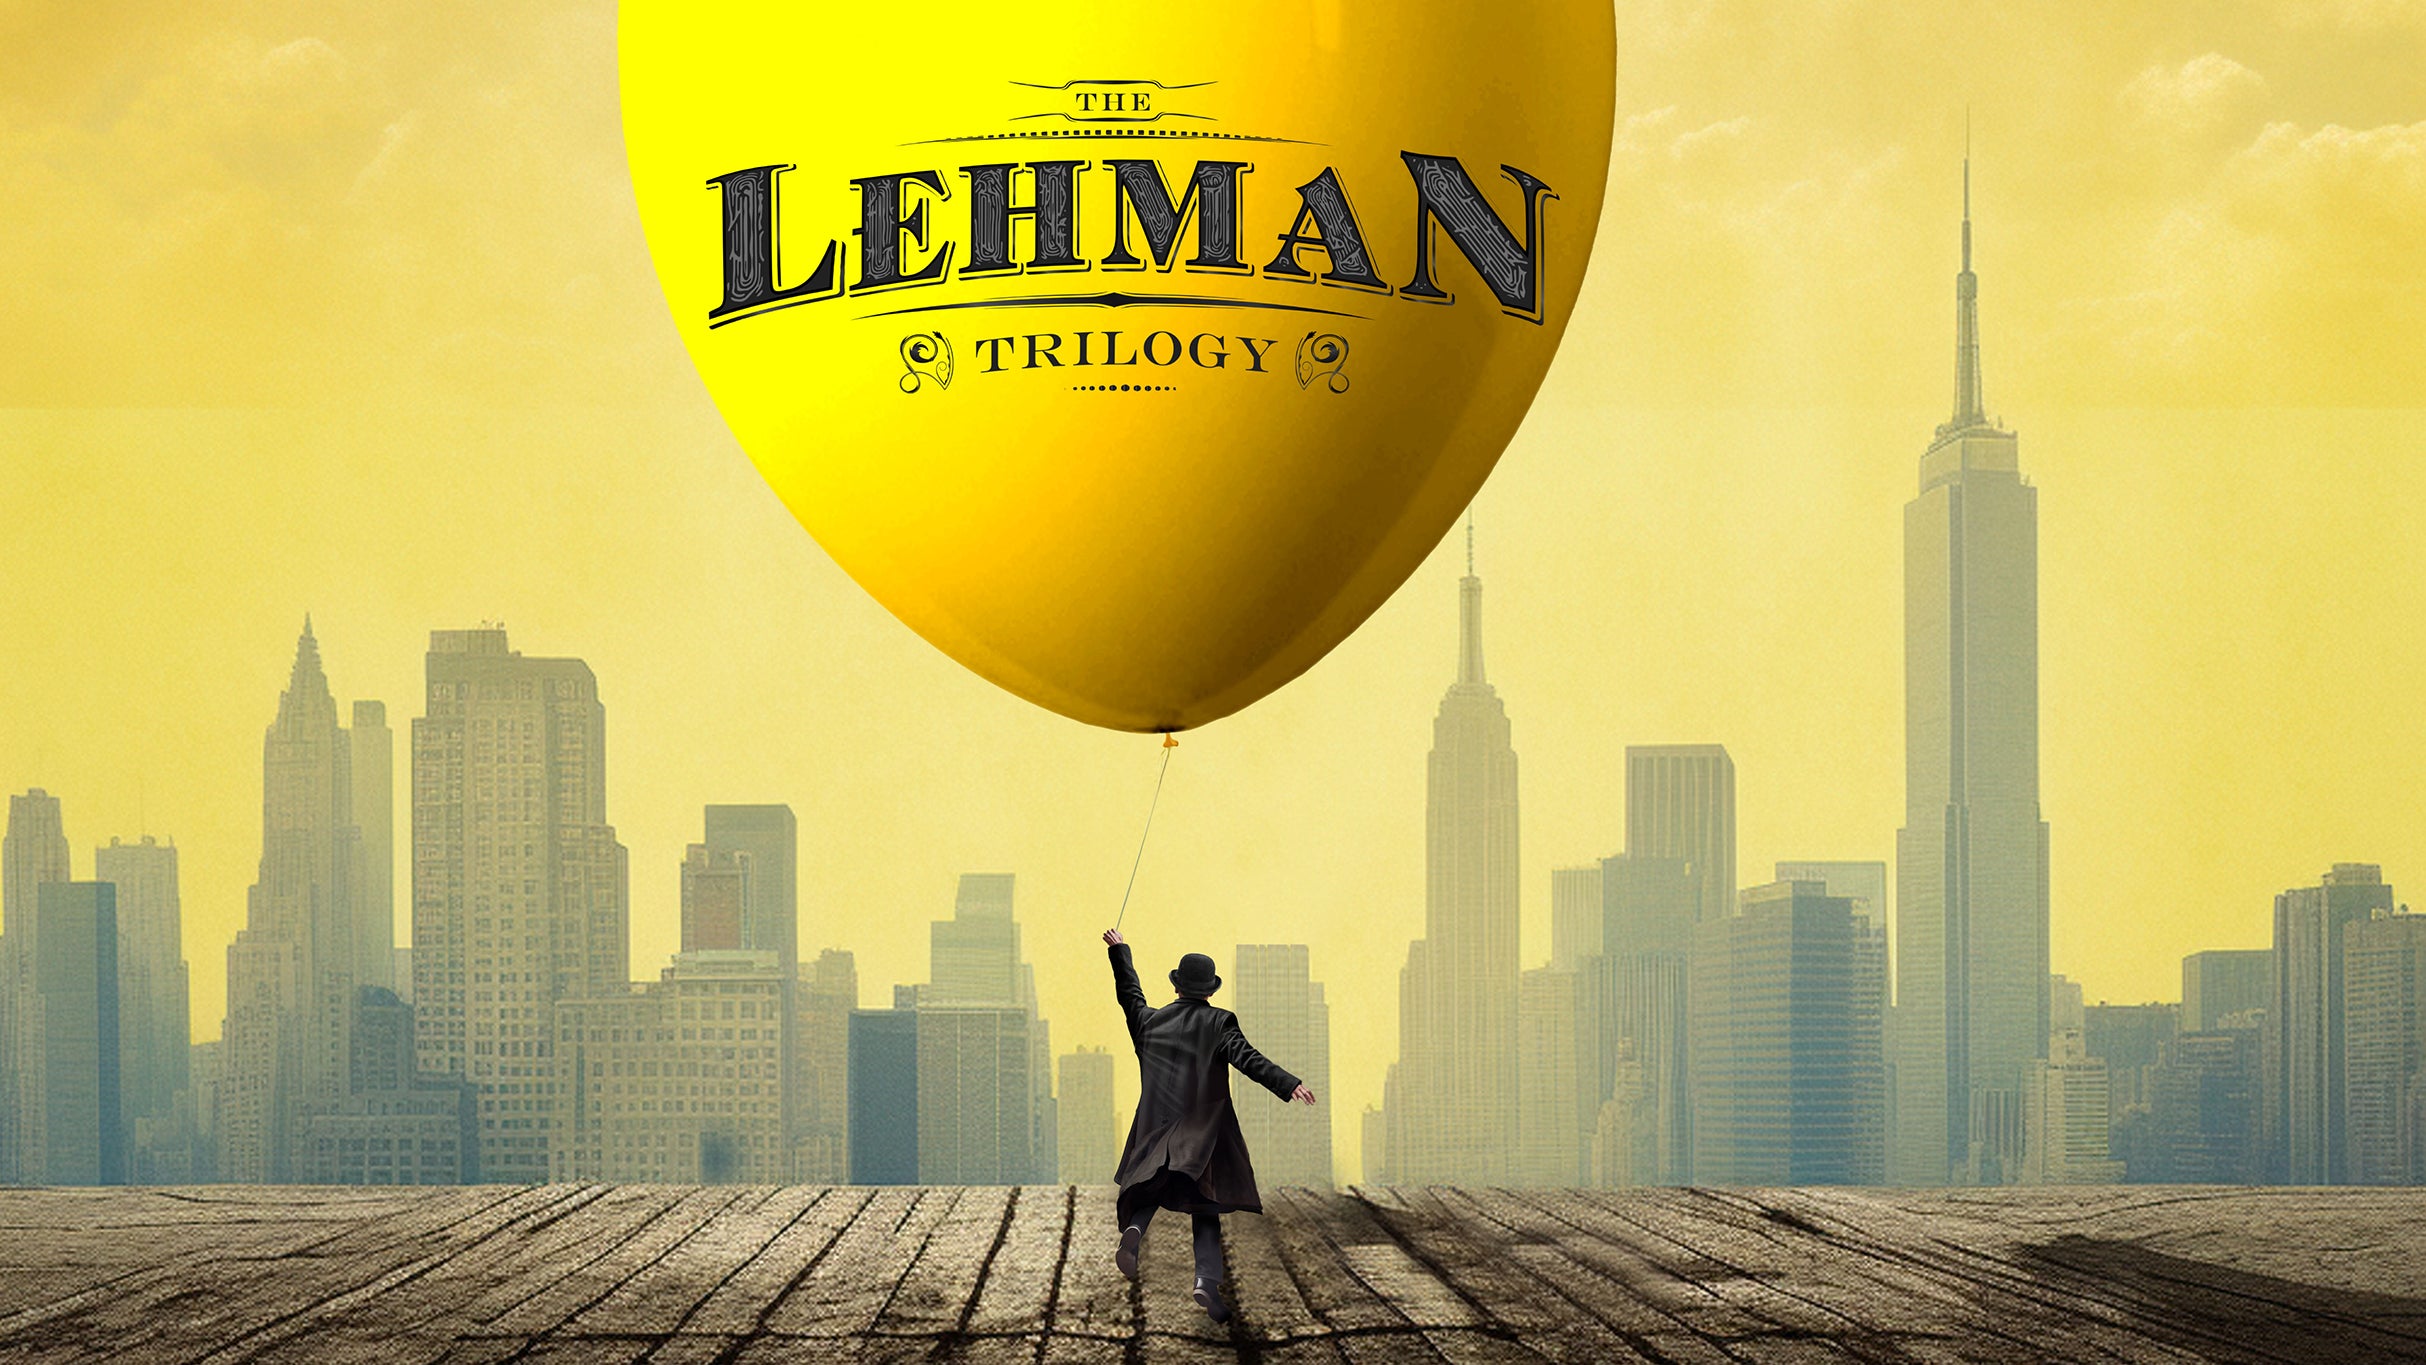 The Lehman Trilogy (Chicago) at Ball Arena